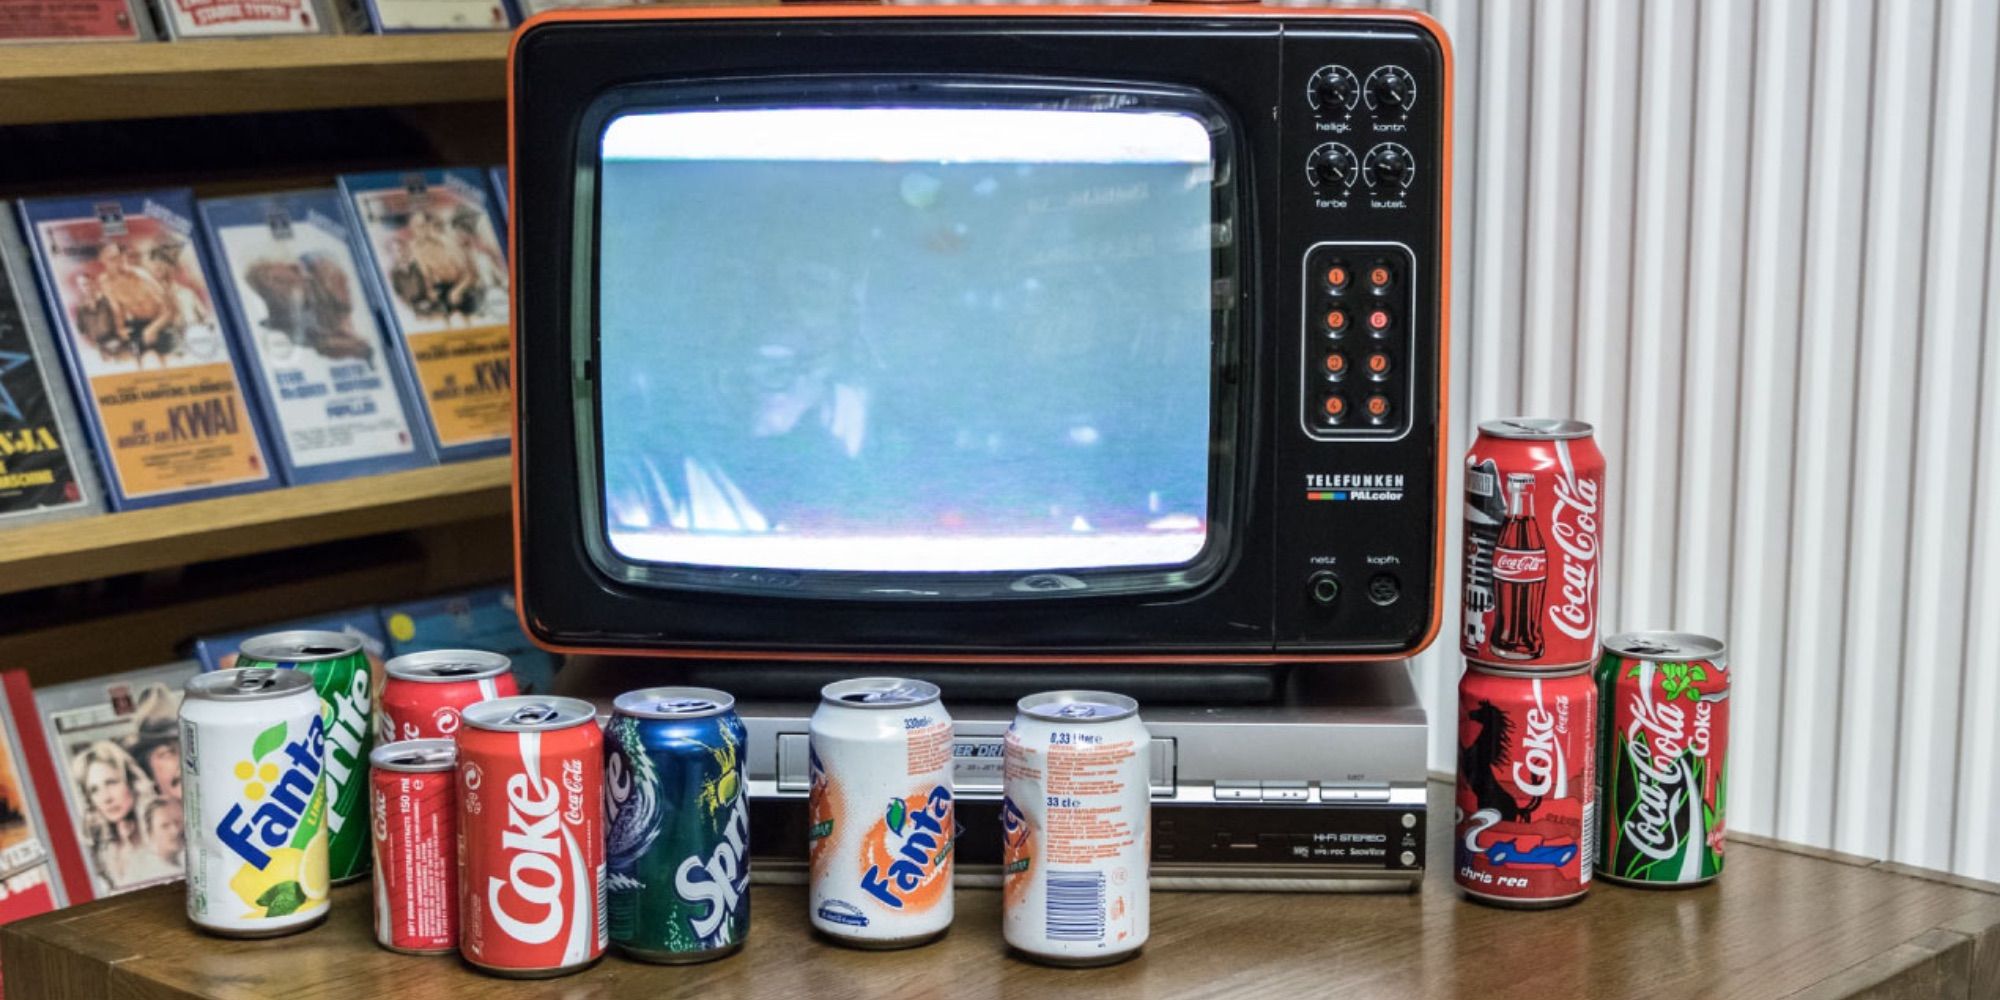 soda cans next to old school TV set